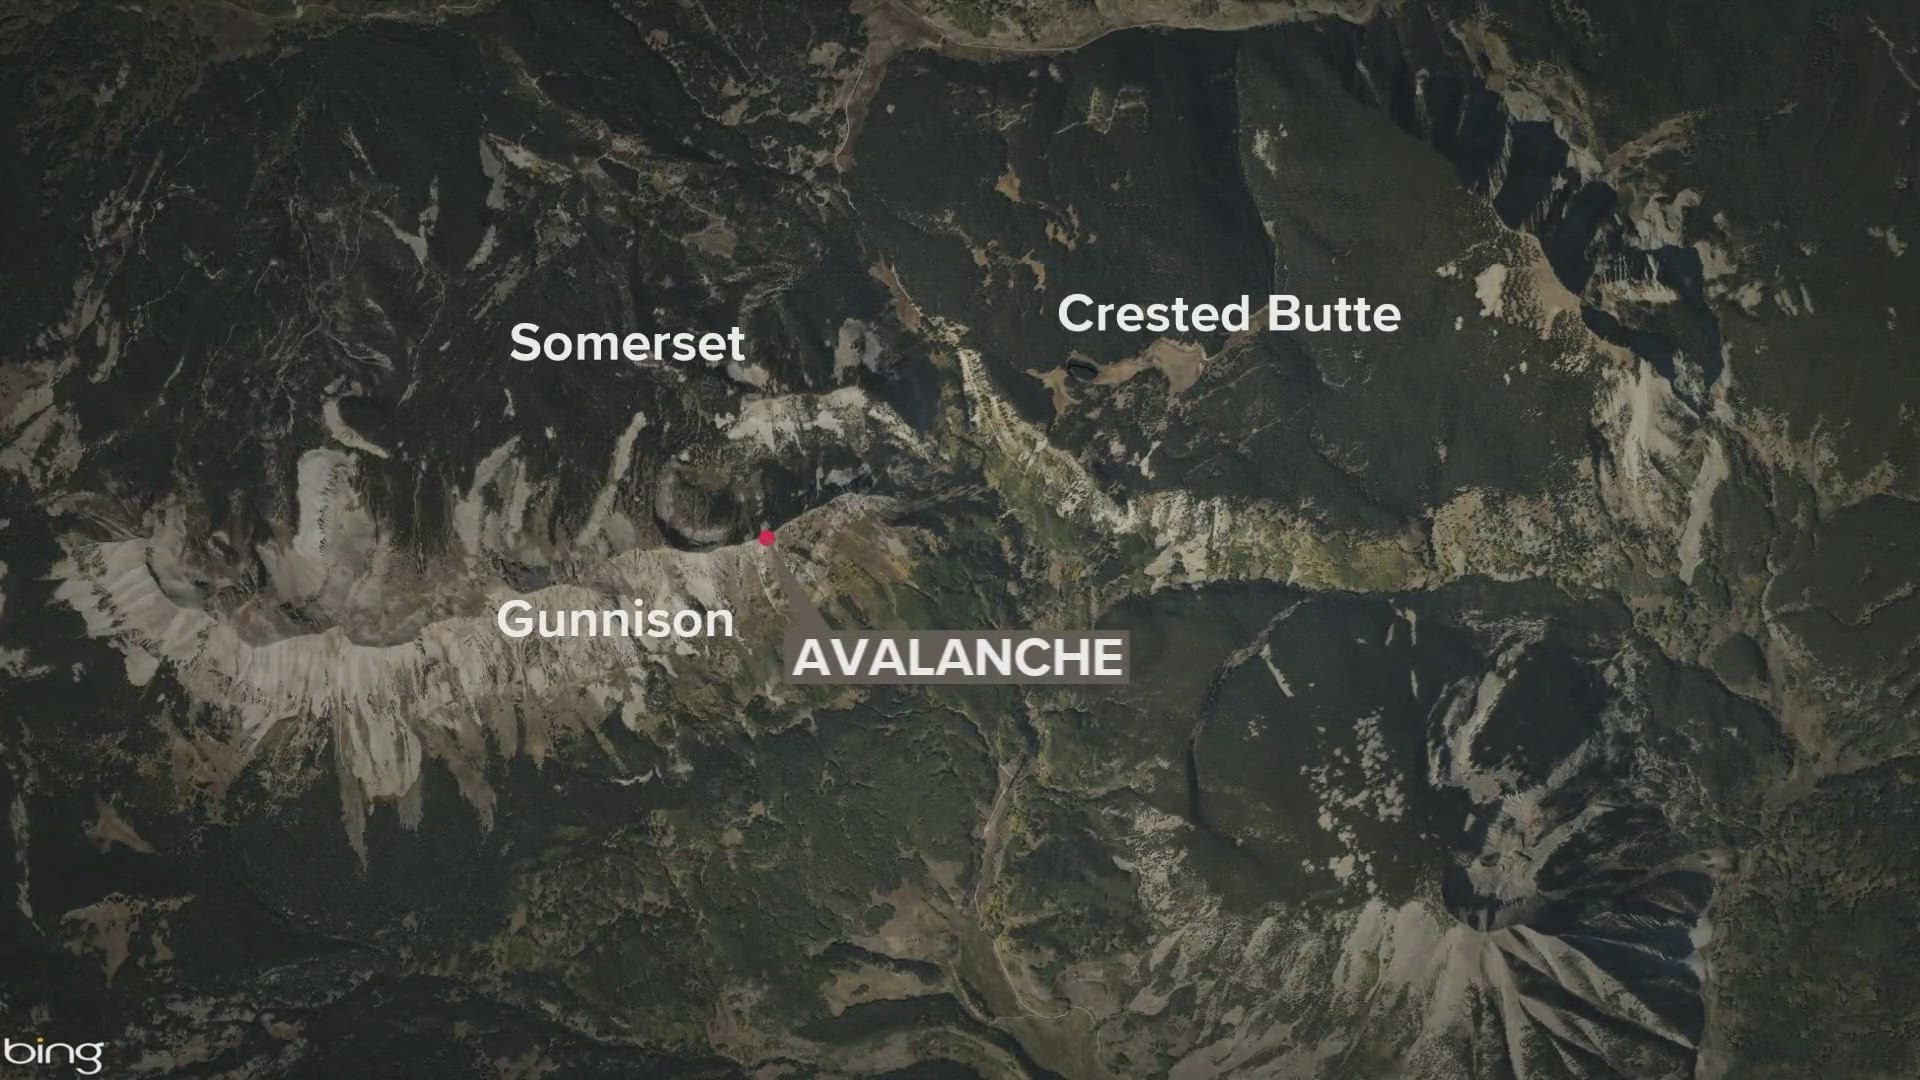 The skier's partners were able to find him and pull him from the avalanche debris, but he died from his injuries.